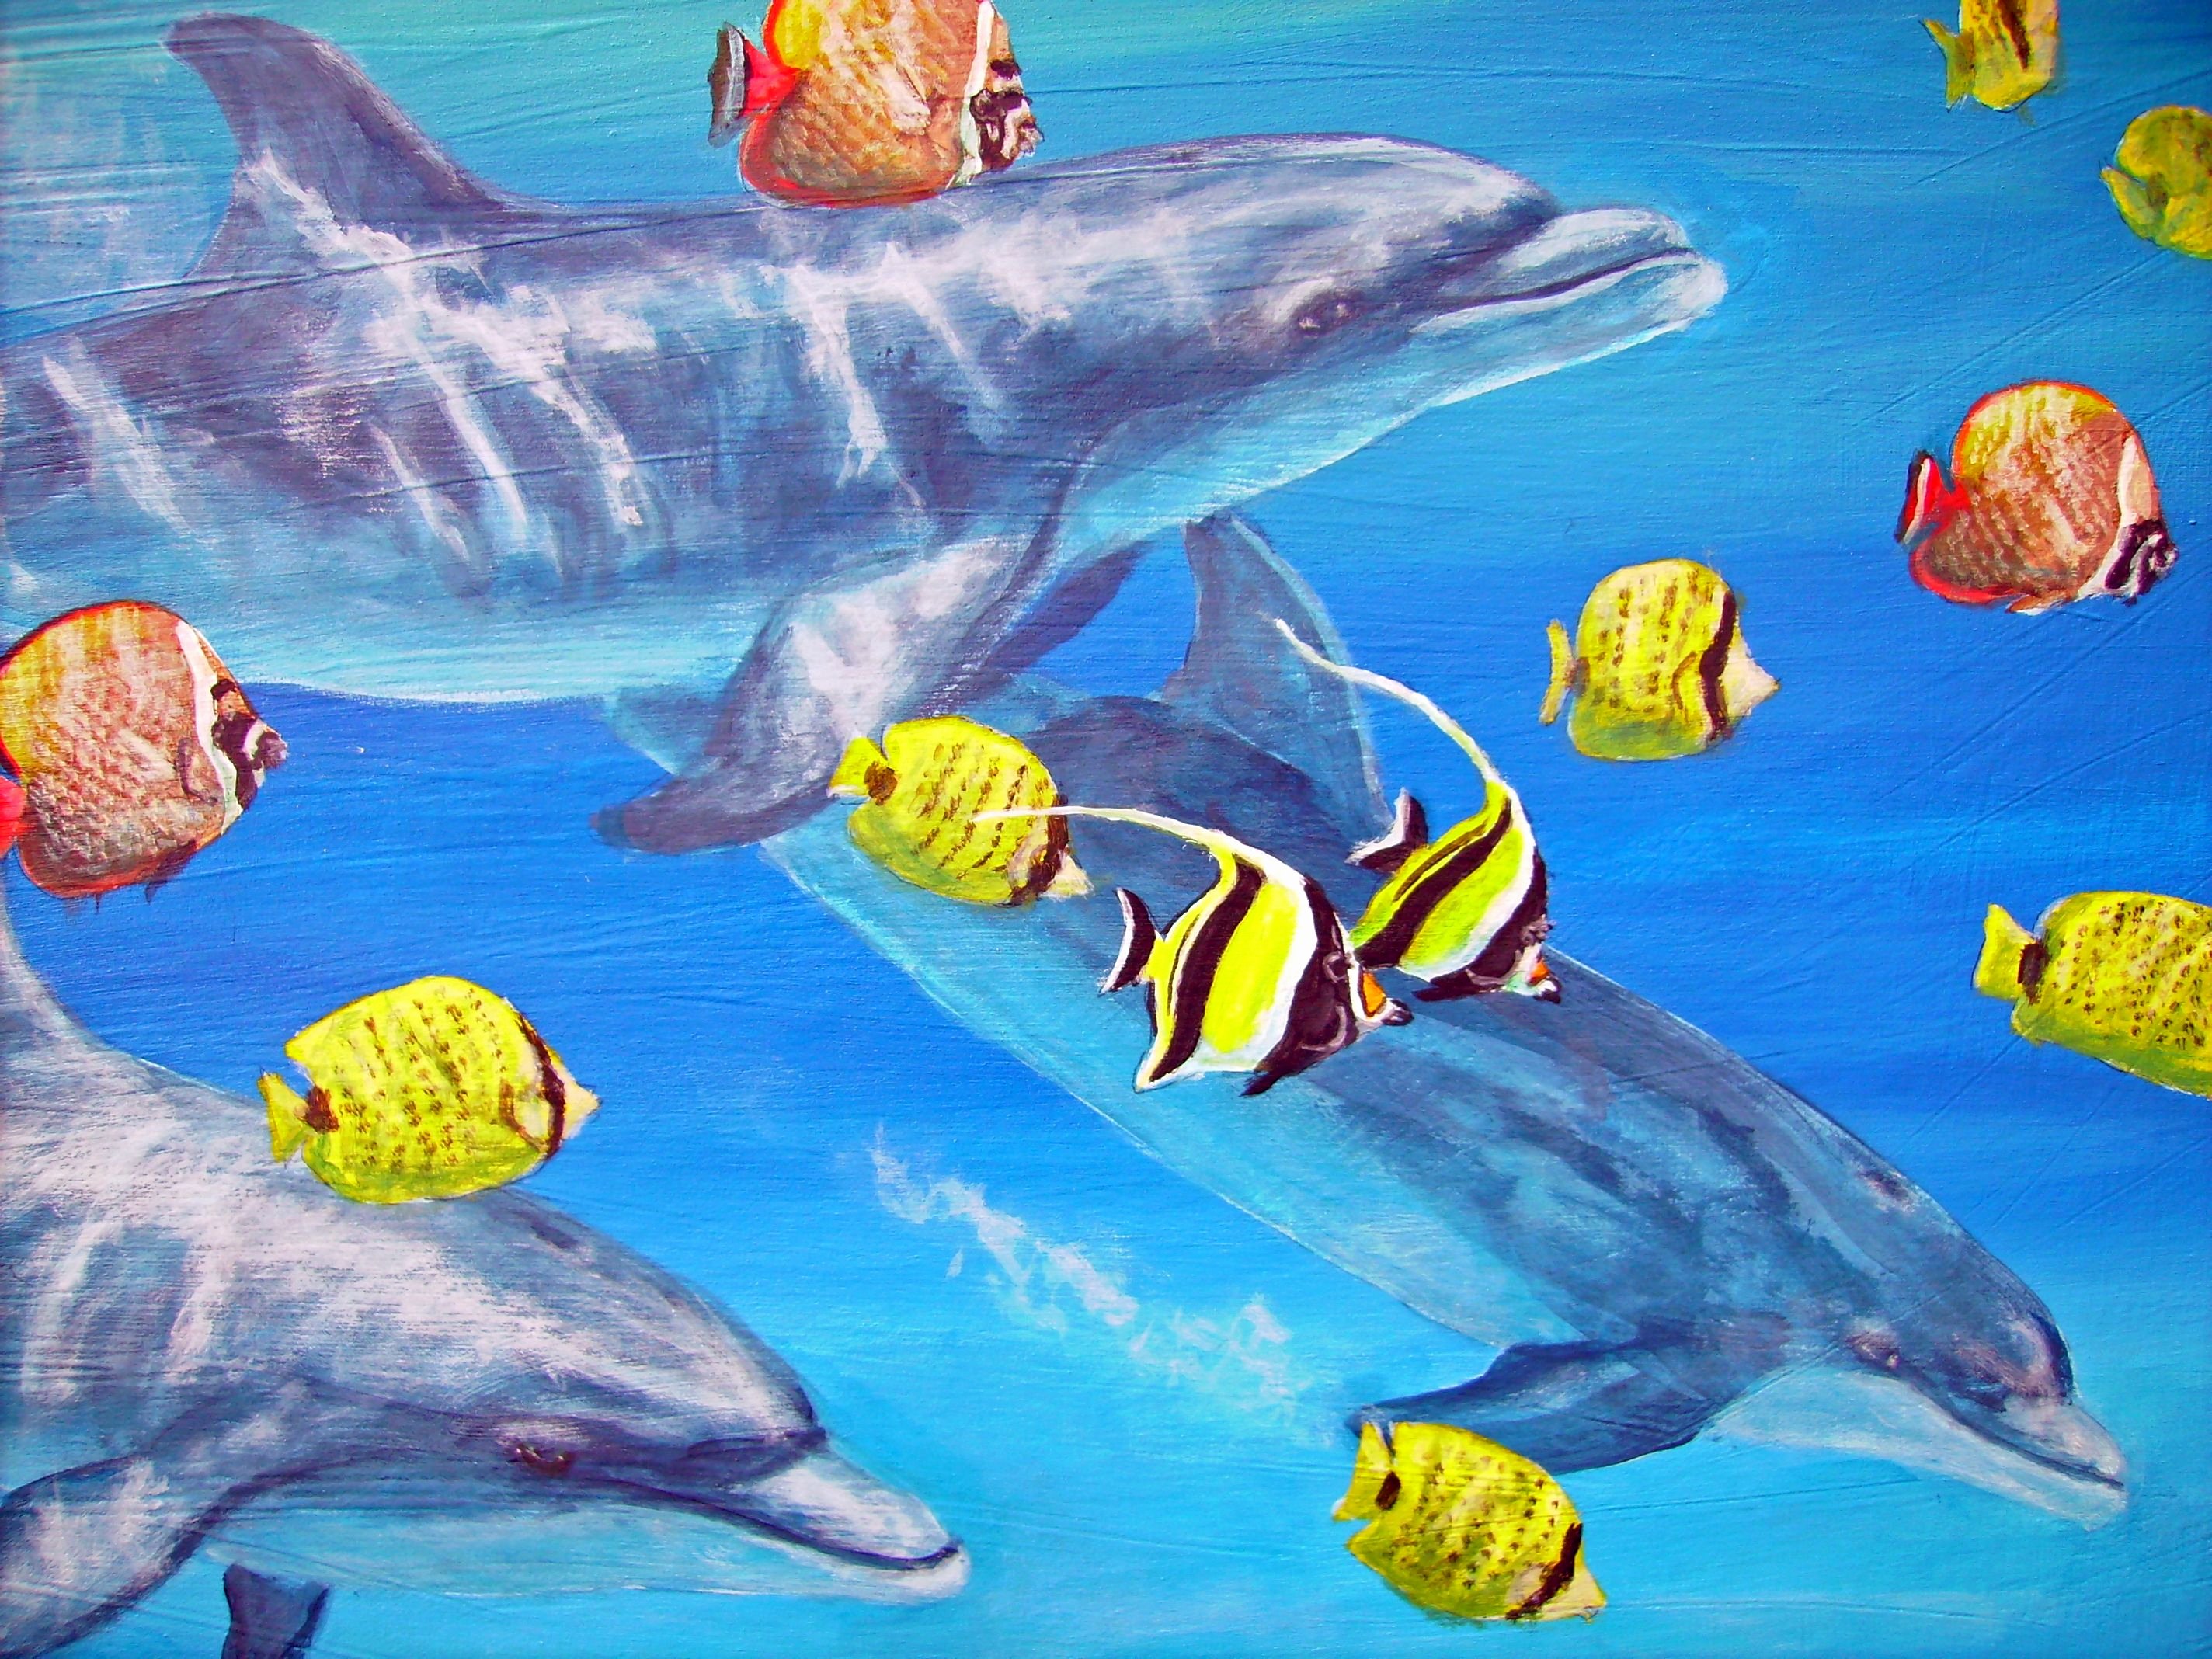 Paintings Of Fish Underwater New Painting Of Dolphins and Tropical Fish Underwater